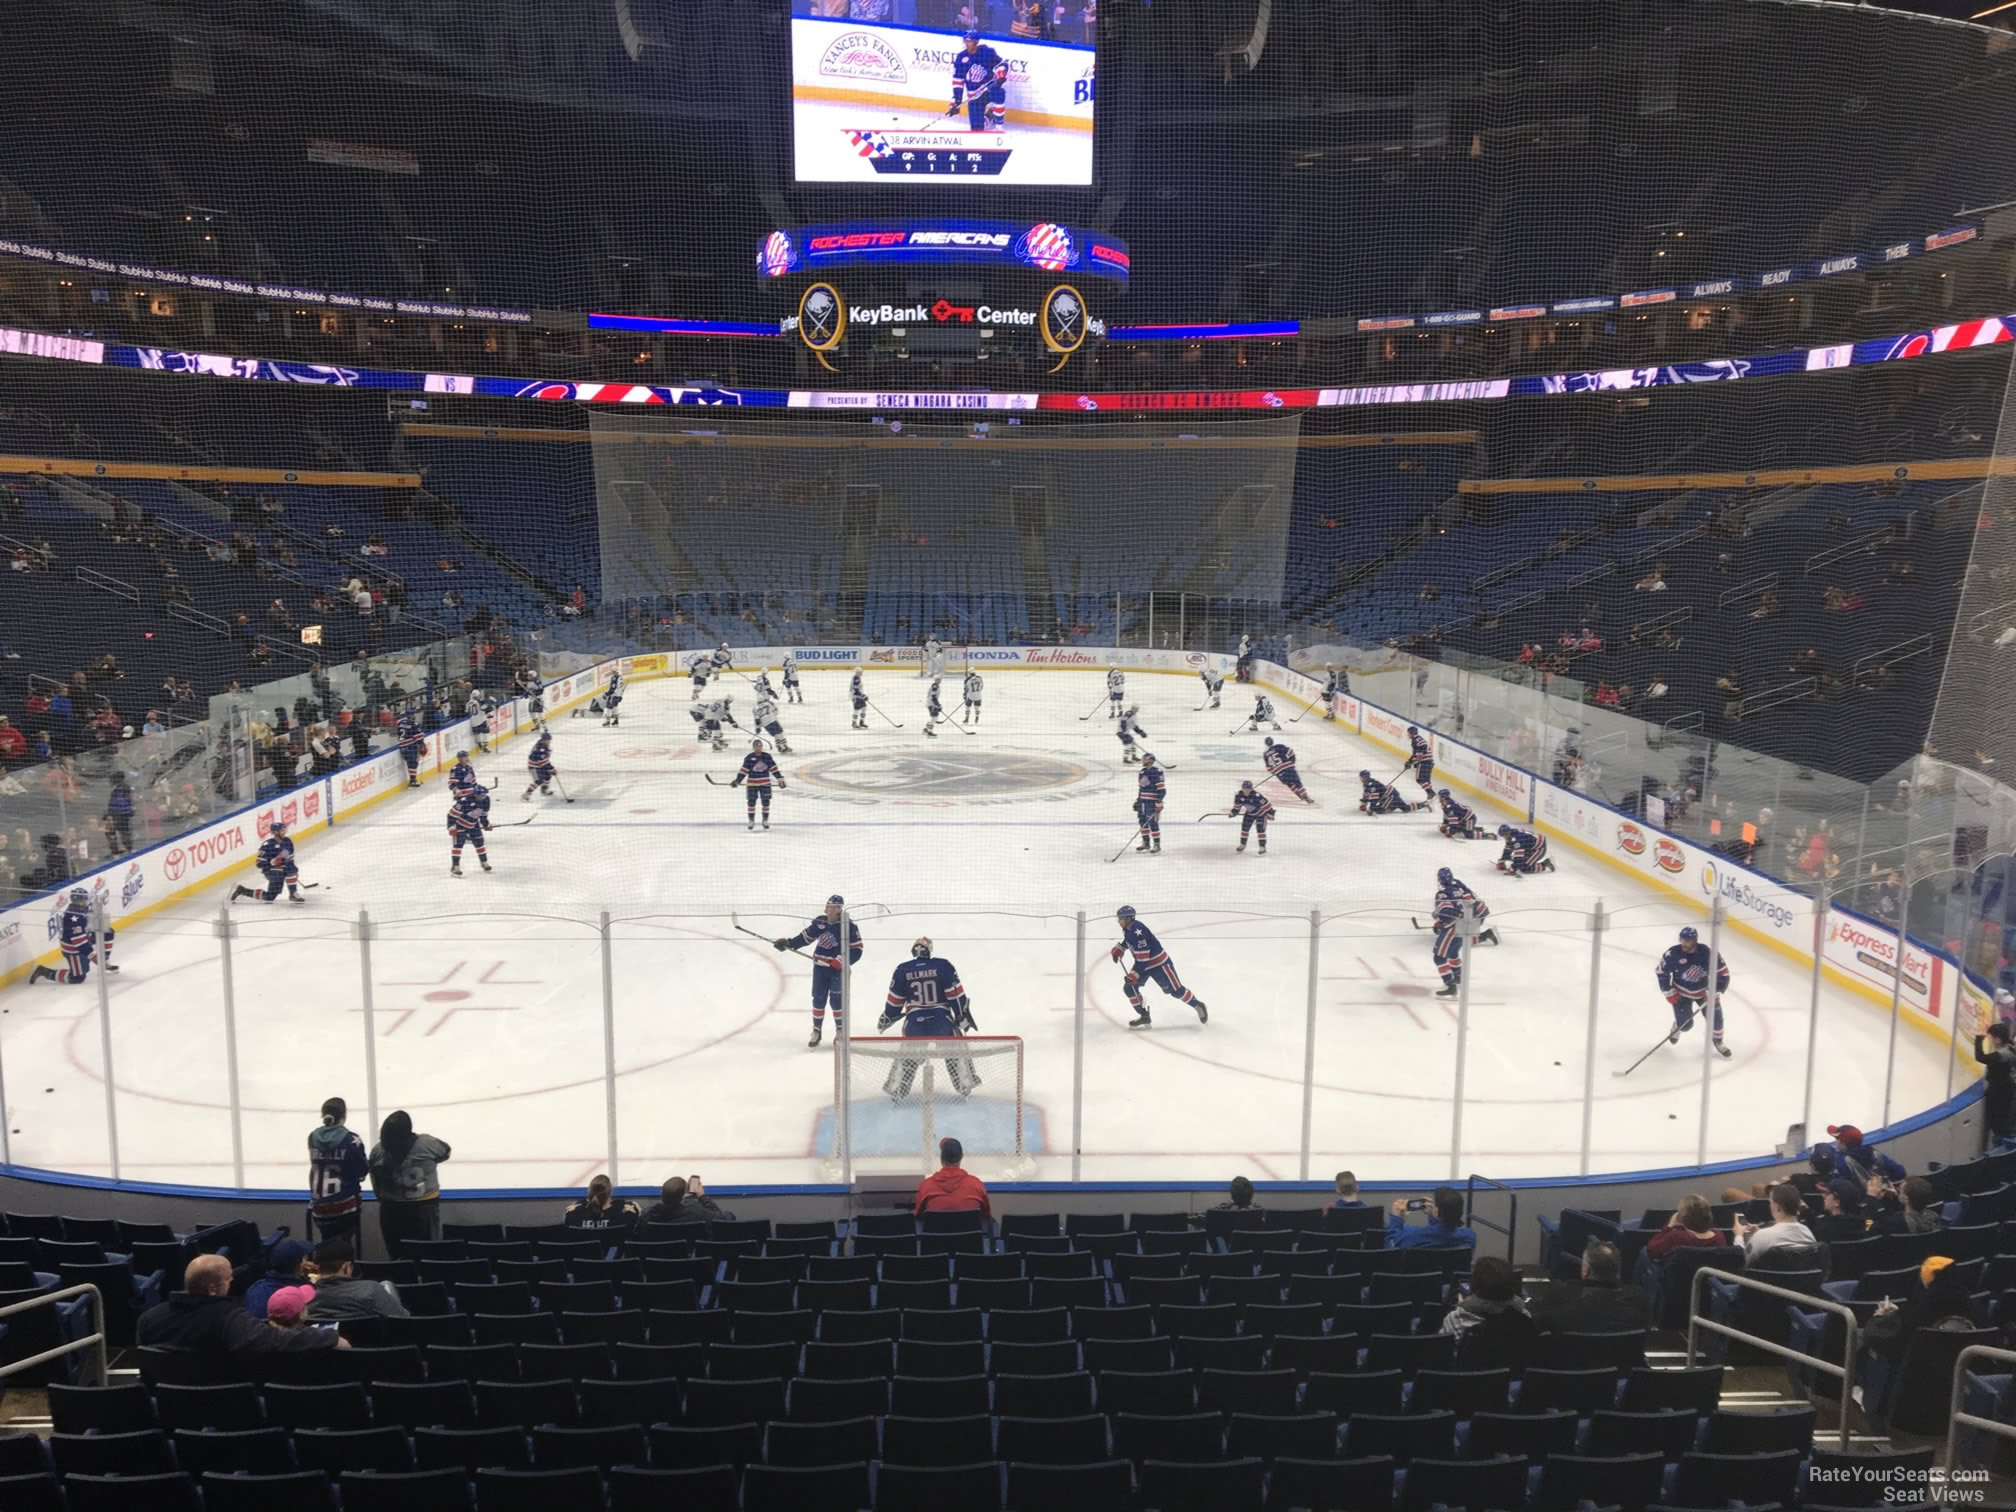 section 123, row 22 seat view  for hockey - keybank center